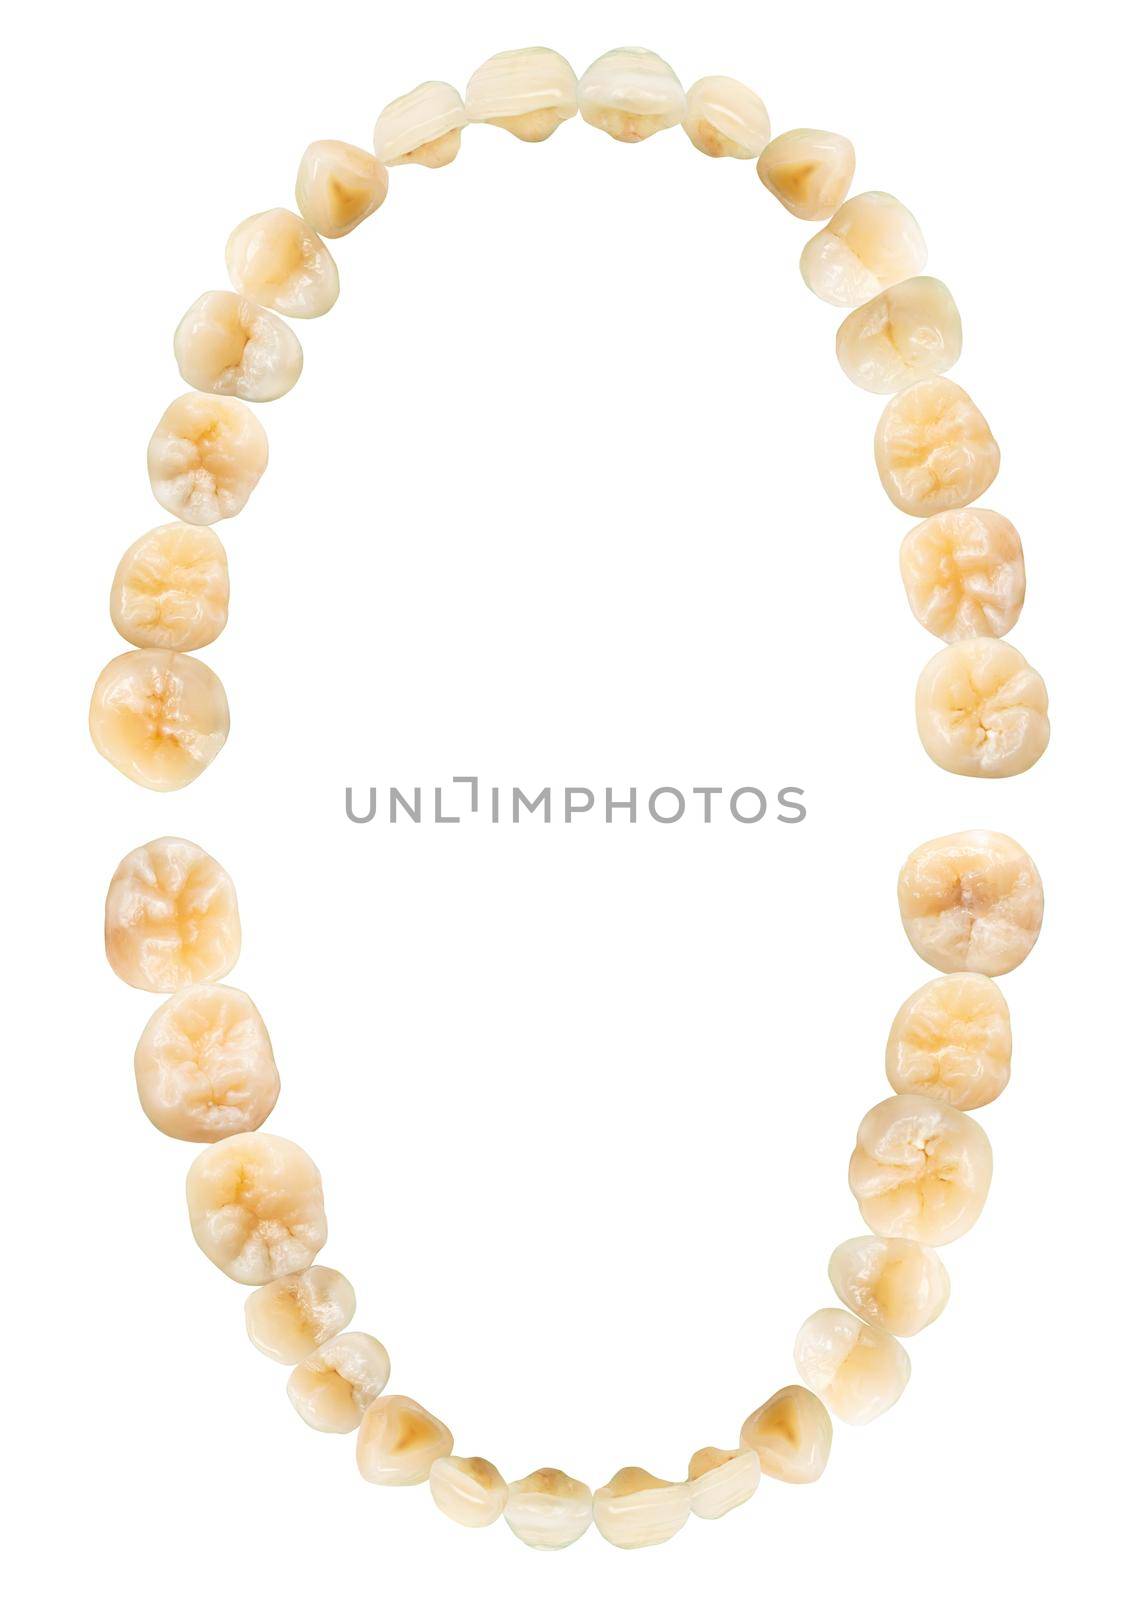 Tooth diagram ( photography ). Real teeth chart . Top view . isolated white background .